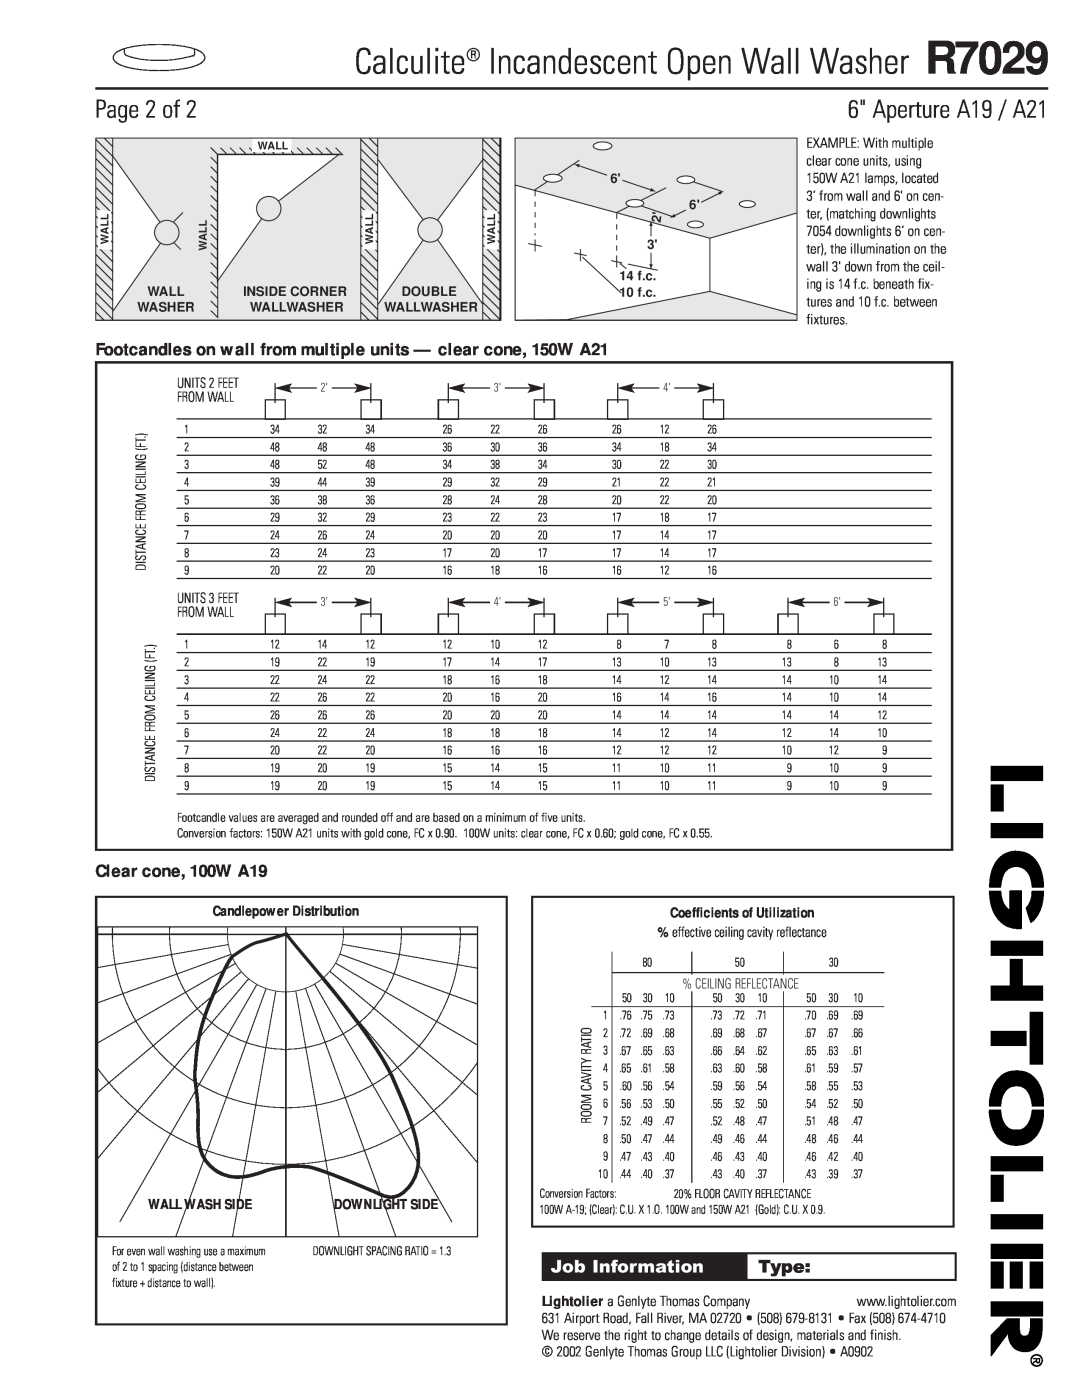 Lightolier Page 2 of, Clear cone, 100W A19, Calculite Incandescent Open Wall Washer R7029, Aperture A19 / A21, Type 